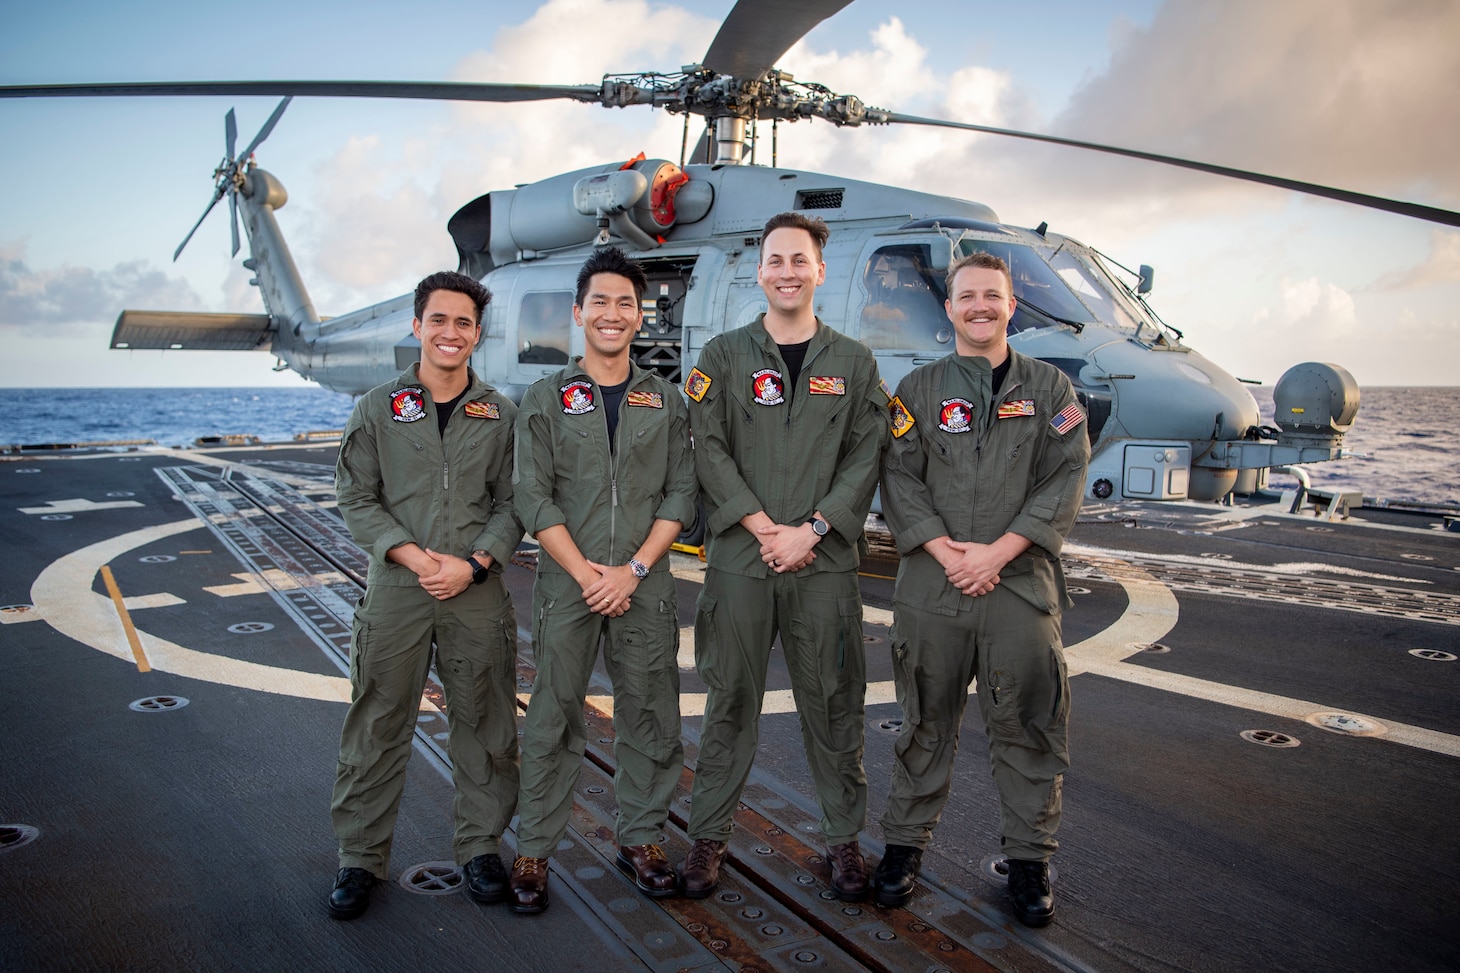 PHILIPPINE SEA (March 27, 2022) Naval Air Crewman (Helicopter) 2nd Class Kaimana Rodriguez, left, from San Dimas, California, Lt. Quoc Duong, from King George, Virginia, Lt. Kristopher Appel, from Knoxville, Tennessee, and Naval Air Crewman (Helicopter) 2nd Class Baldwin Switzer, from Ocala, Florida, assigned to the “Warlords” of Helicopter Maritime Strike Squadron (HSM) 51 Detachment 3, pose for a photo in front of a MH-60R helicopter to celebrate a successful search and rescue operation, March 26, off the coast of Guam. HSM-51 Detachment 3, attached to the Arleigh Burke-class guided-missile destroyer USS Dewey (DDG 105), is conducting routine operations in the U.S. 7th Fleet area of responsibility in support of a free and open Indo-Pacific. (U.S. Navy photo by Mass Communication Specialist 1st Class Benjamin Lewis)